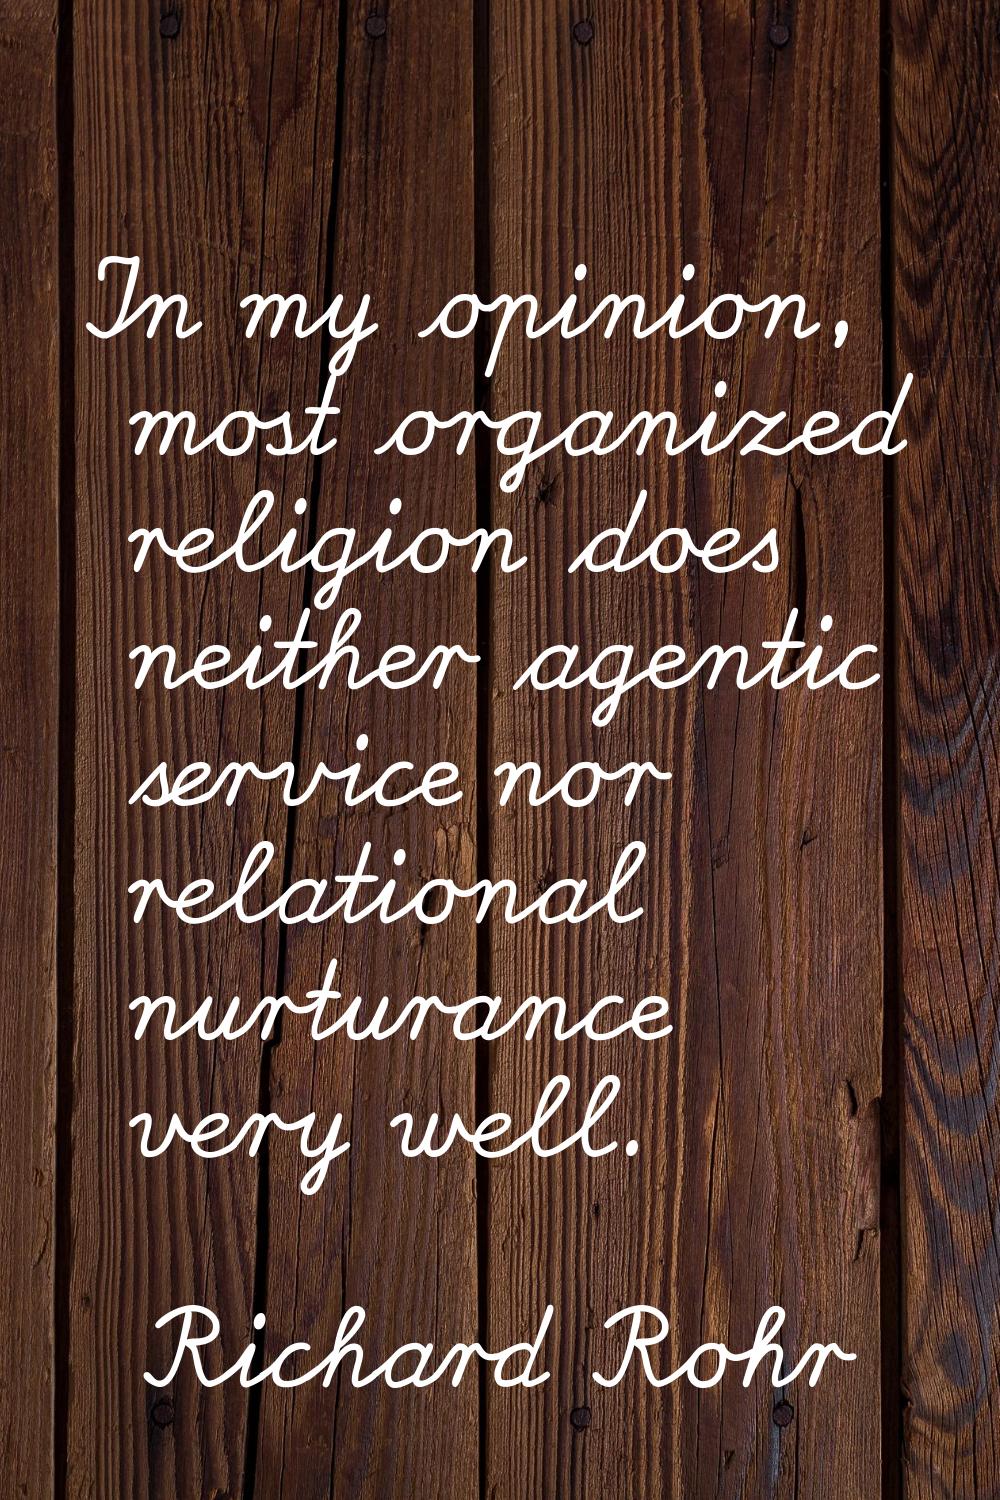 In my opinion, most organized religion does neither agentic service nor relational nurturance very 